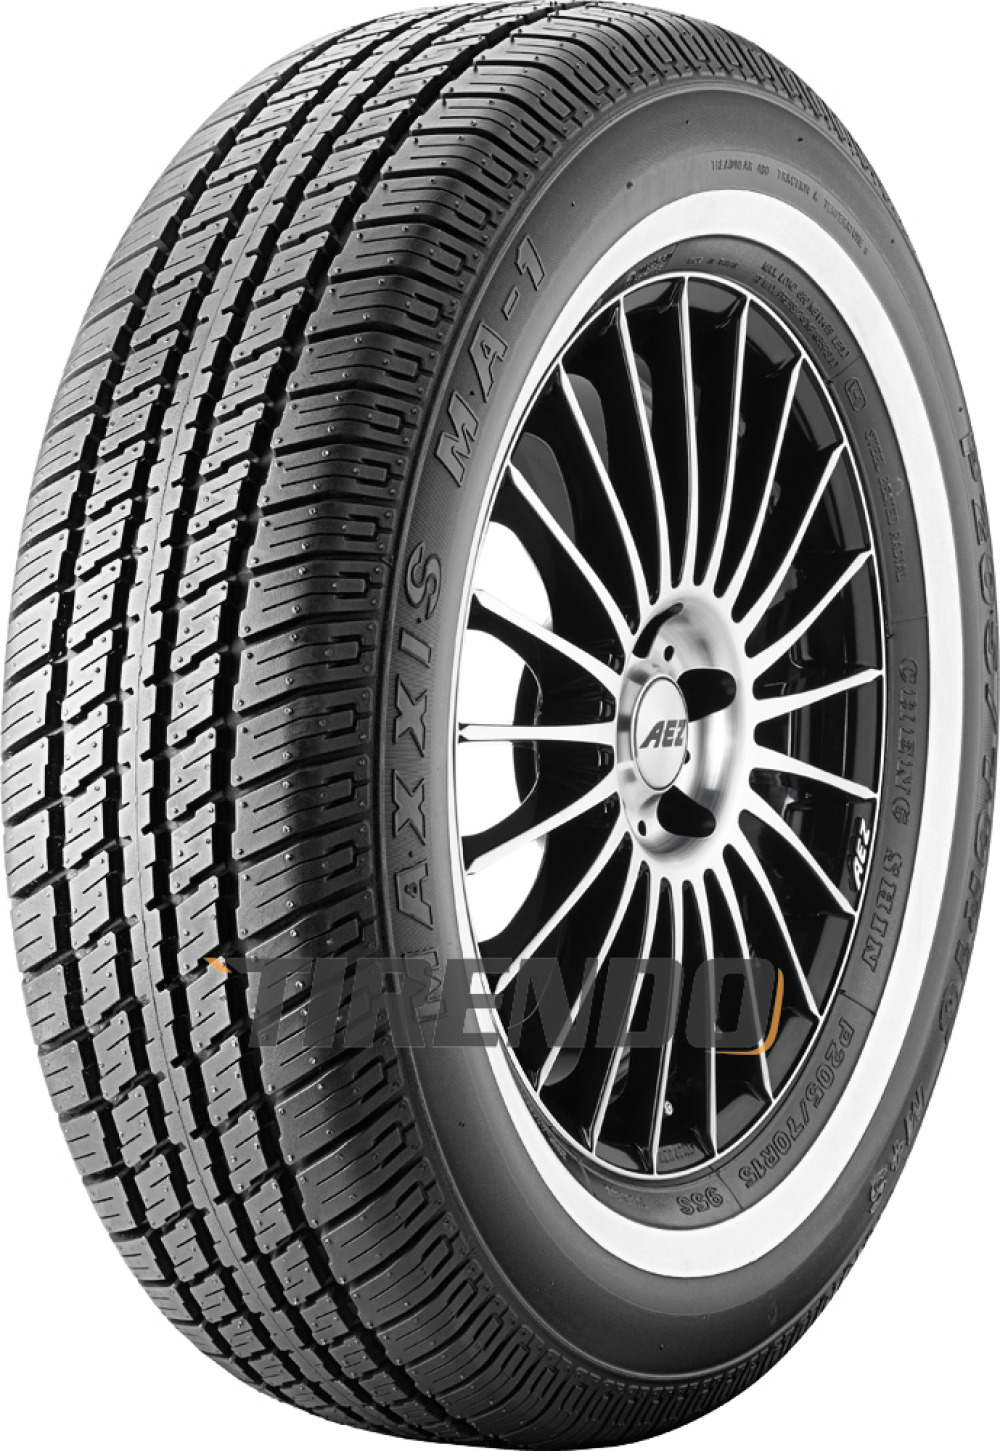 Maxxis MA 1 ( 215/70 R14 96S WSW 20mm ) von Maxxis